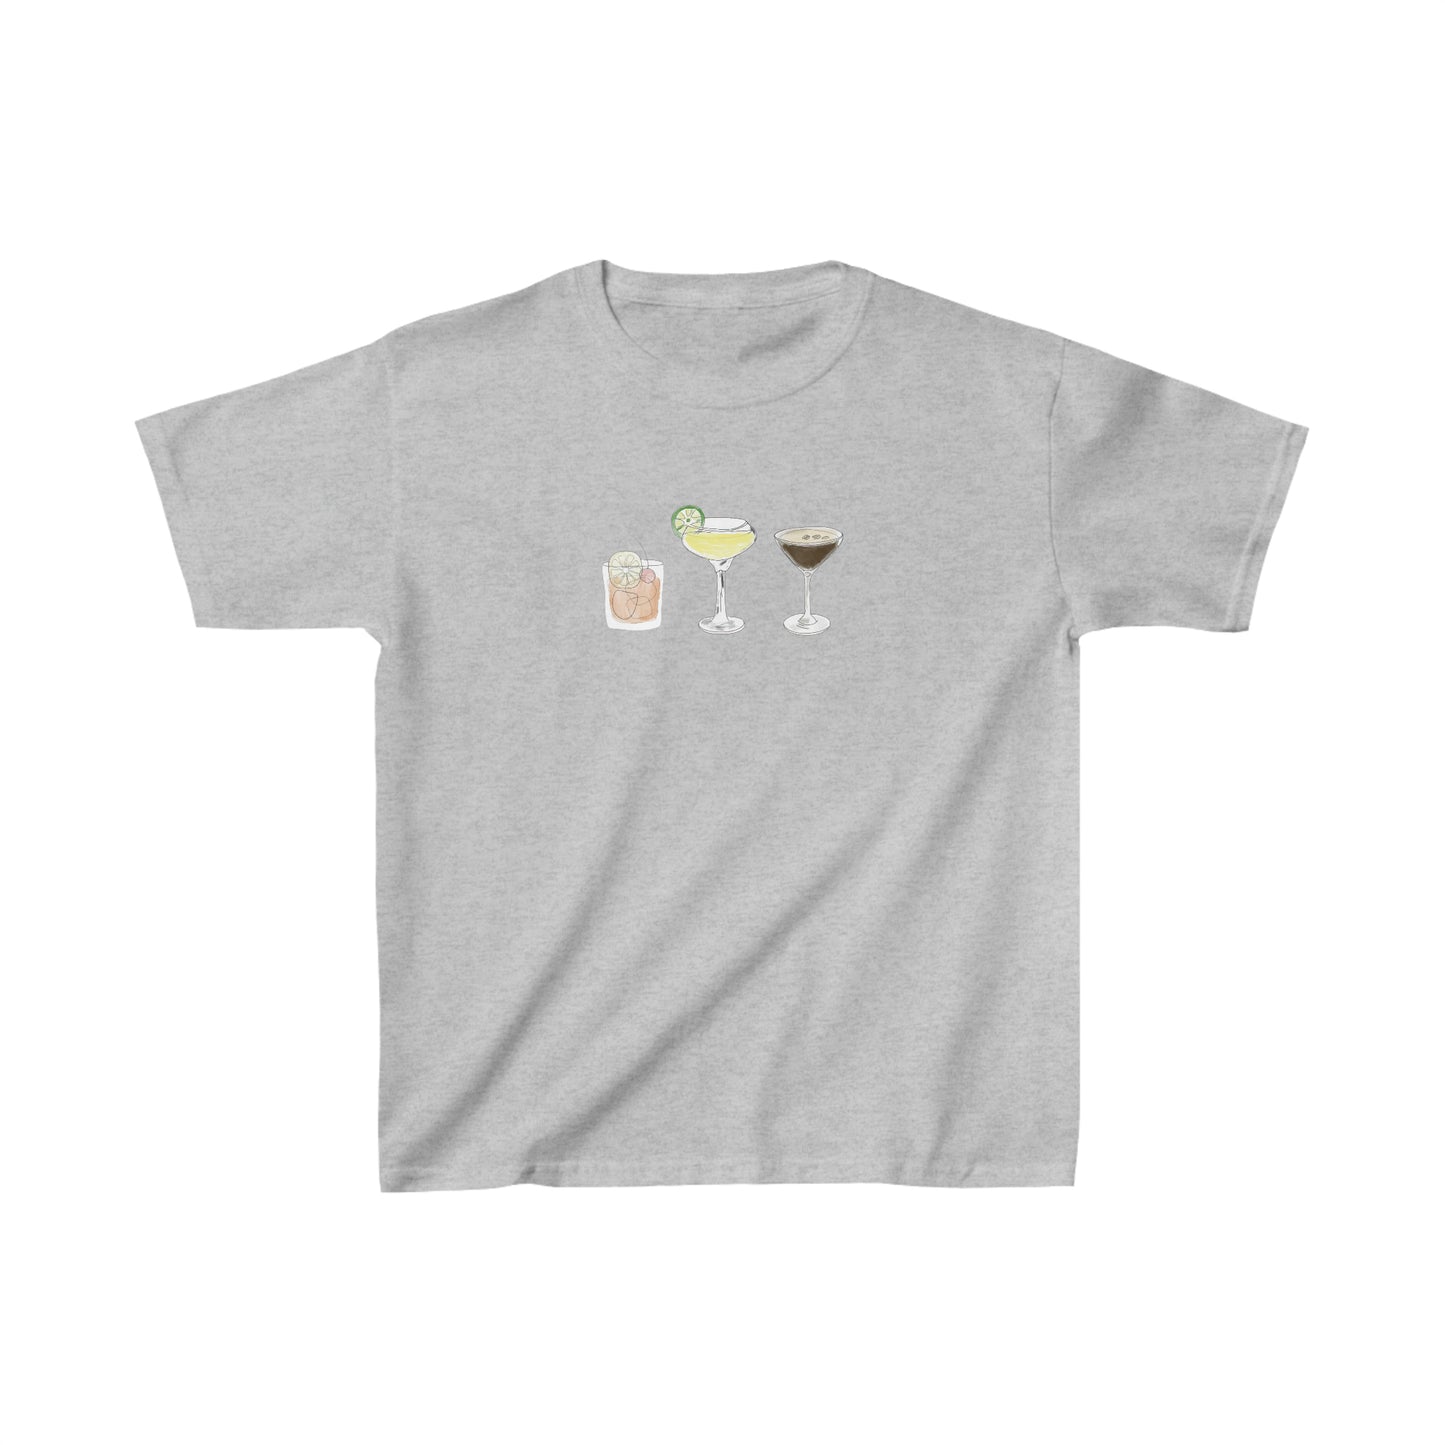 Cocktails Please! Boxy Fit Baby Tee